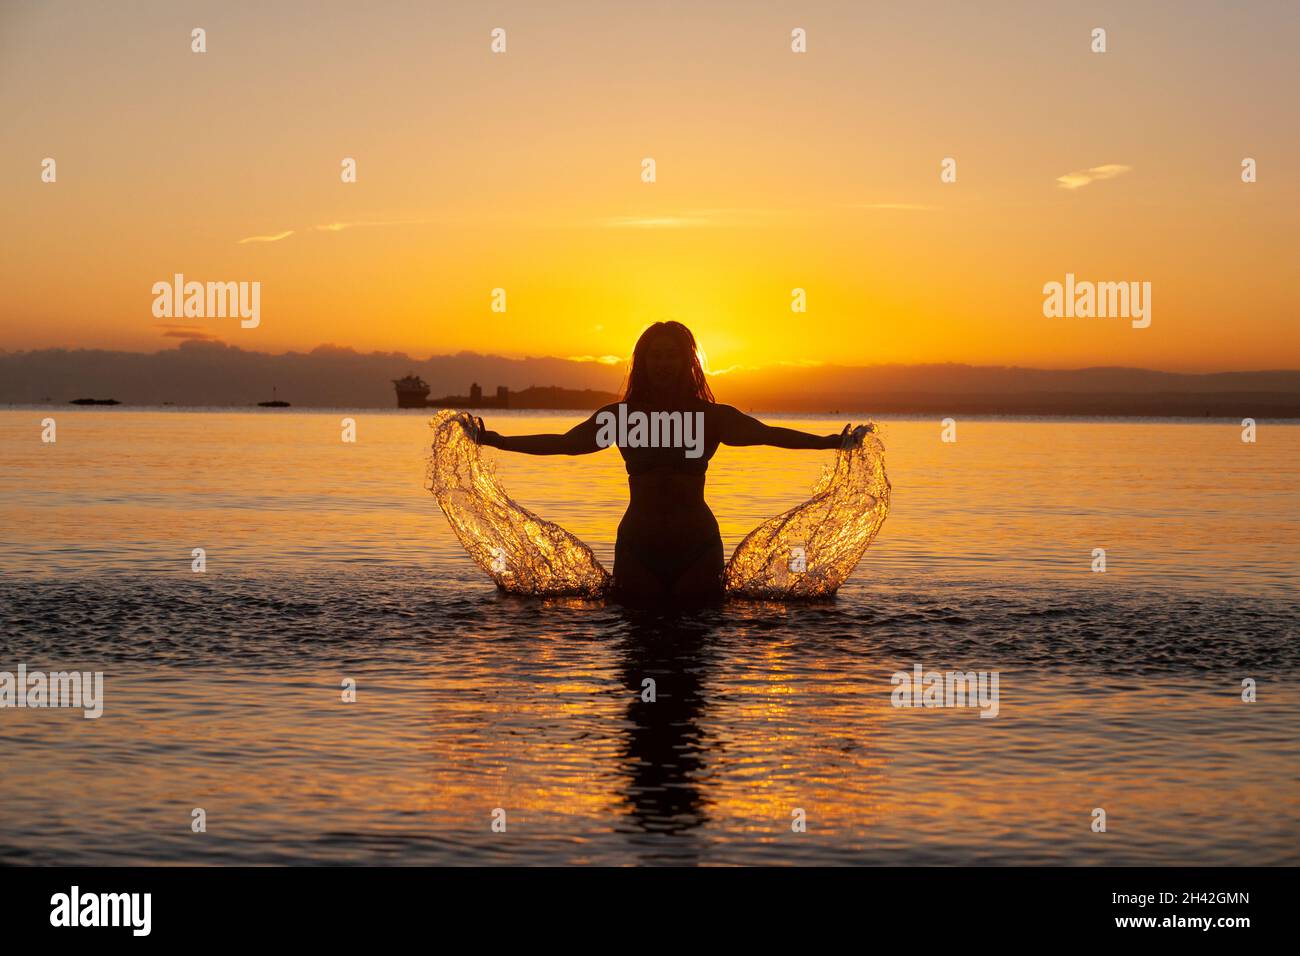 A woman splashing the water on a cold October sunrise in Scotland Stock Photo